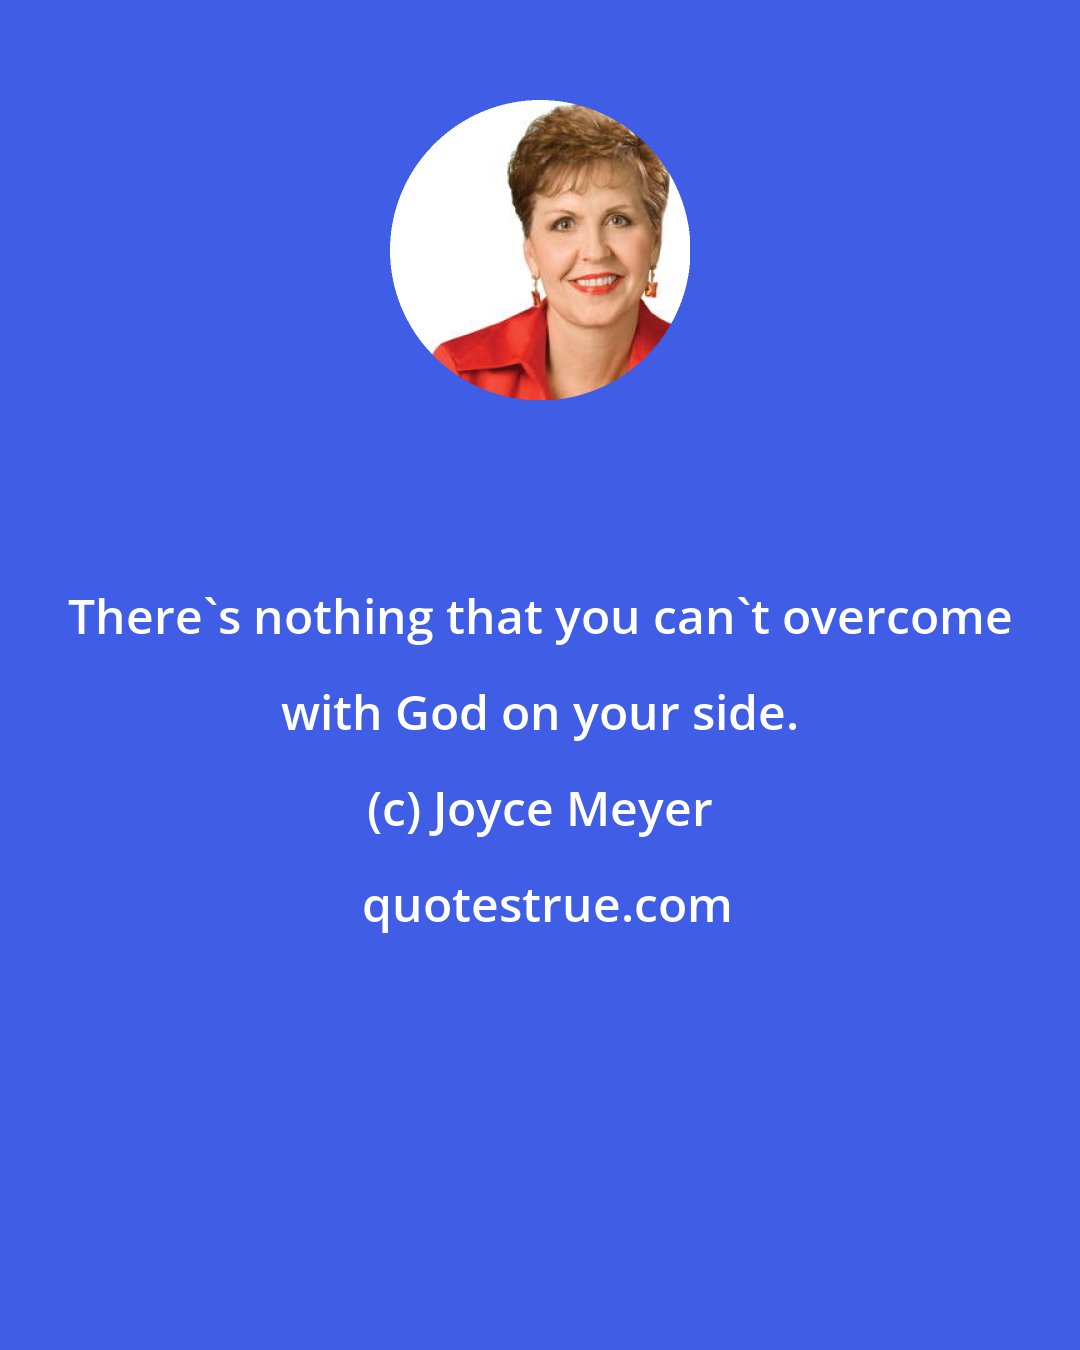 Joyce Meyer: There's nothing that you can't overcome with God on your side.